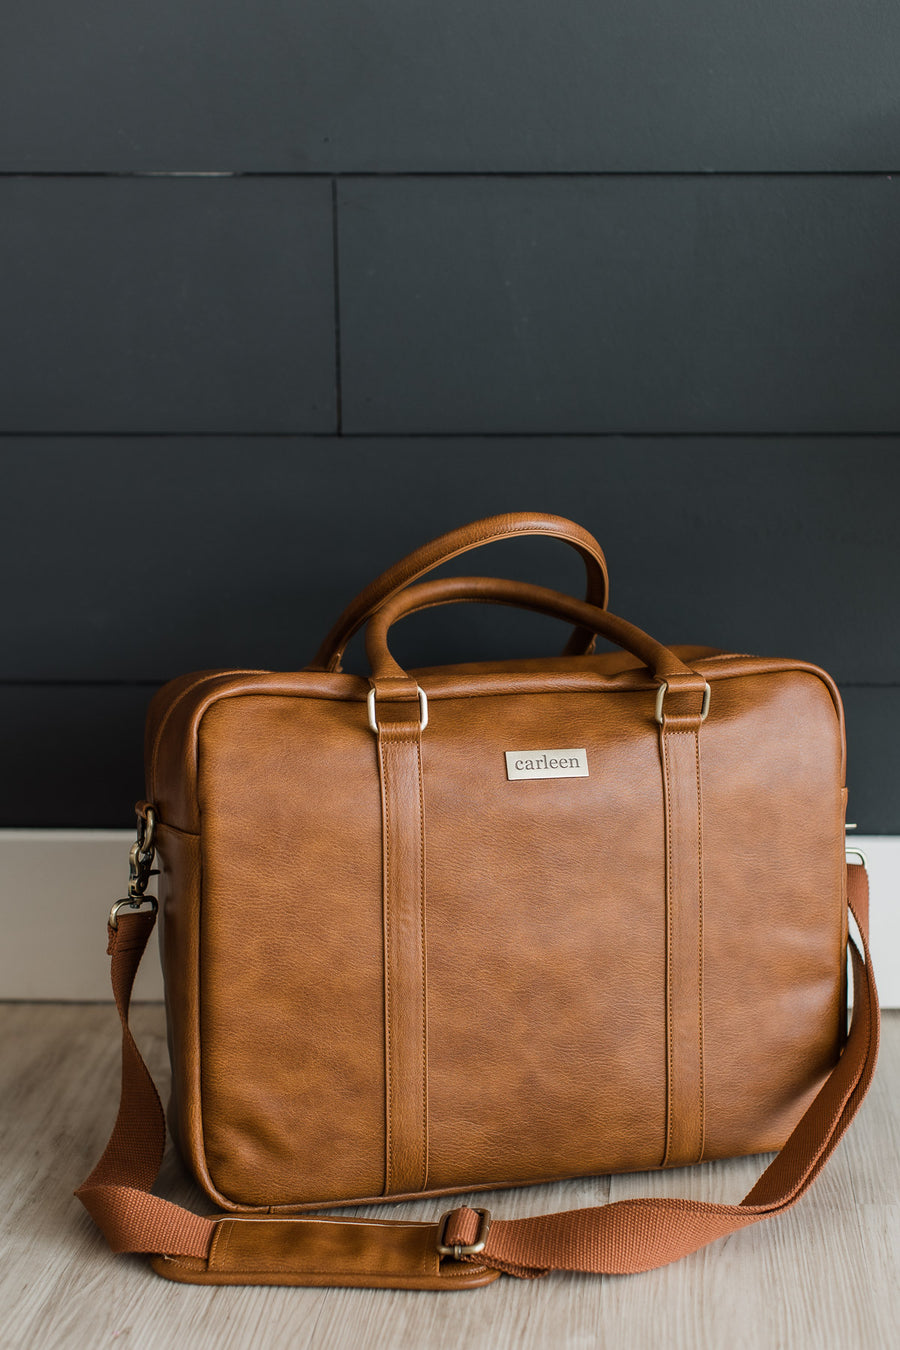 Down to Business Canvas Camera Bag - Weathered Brown